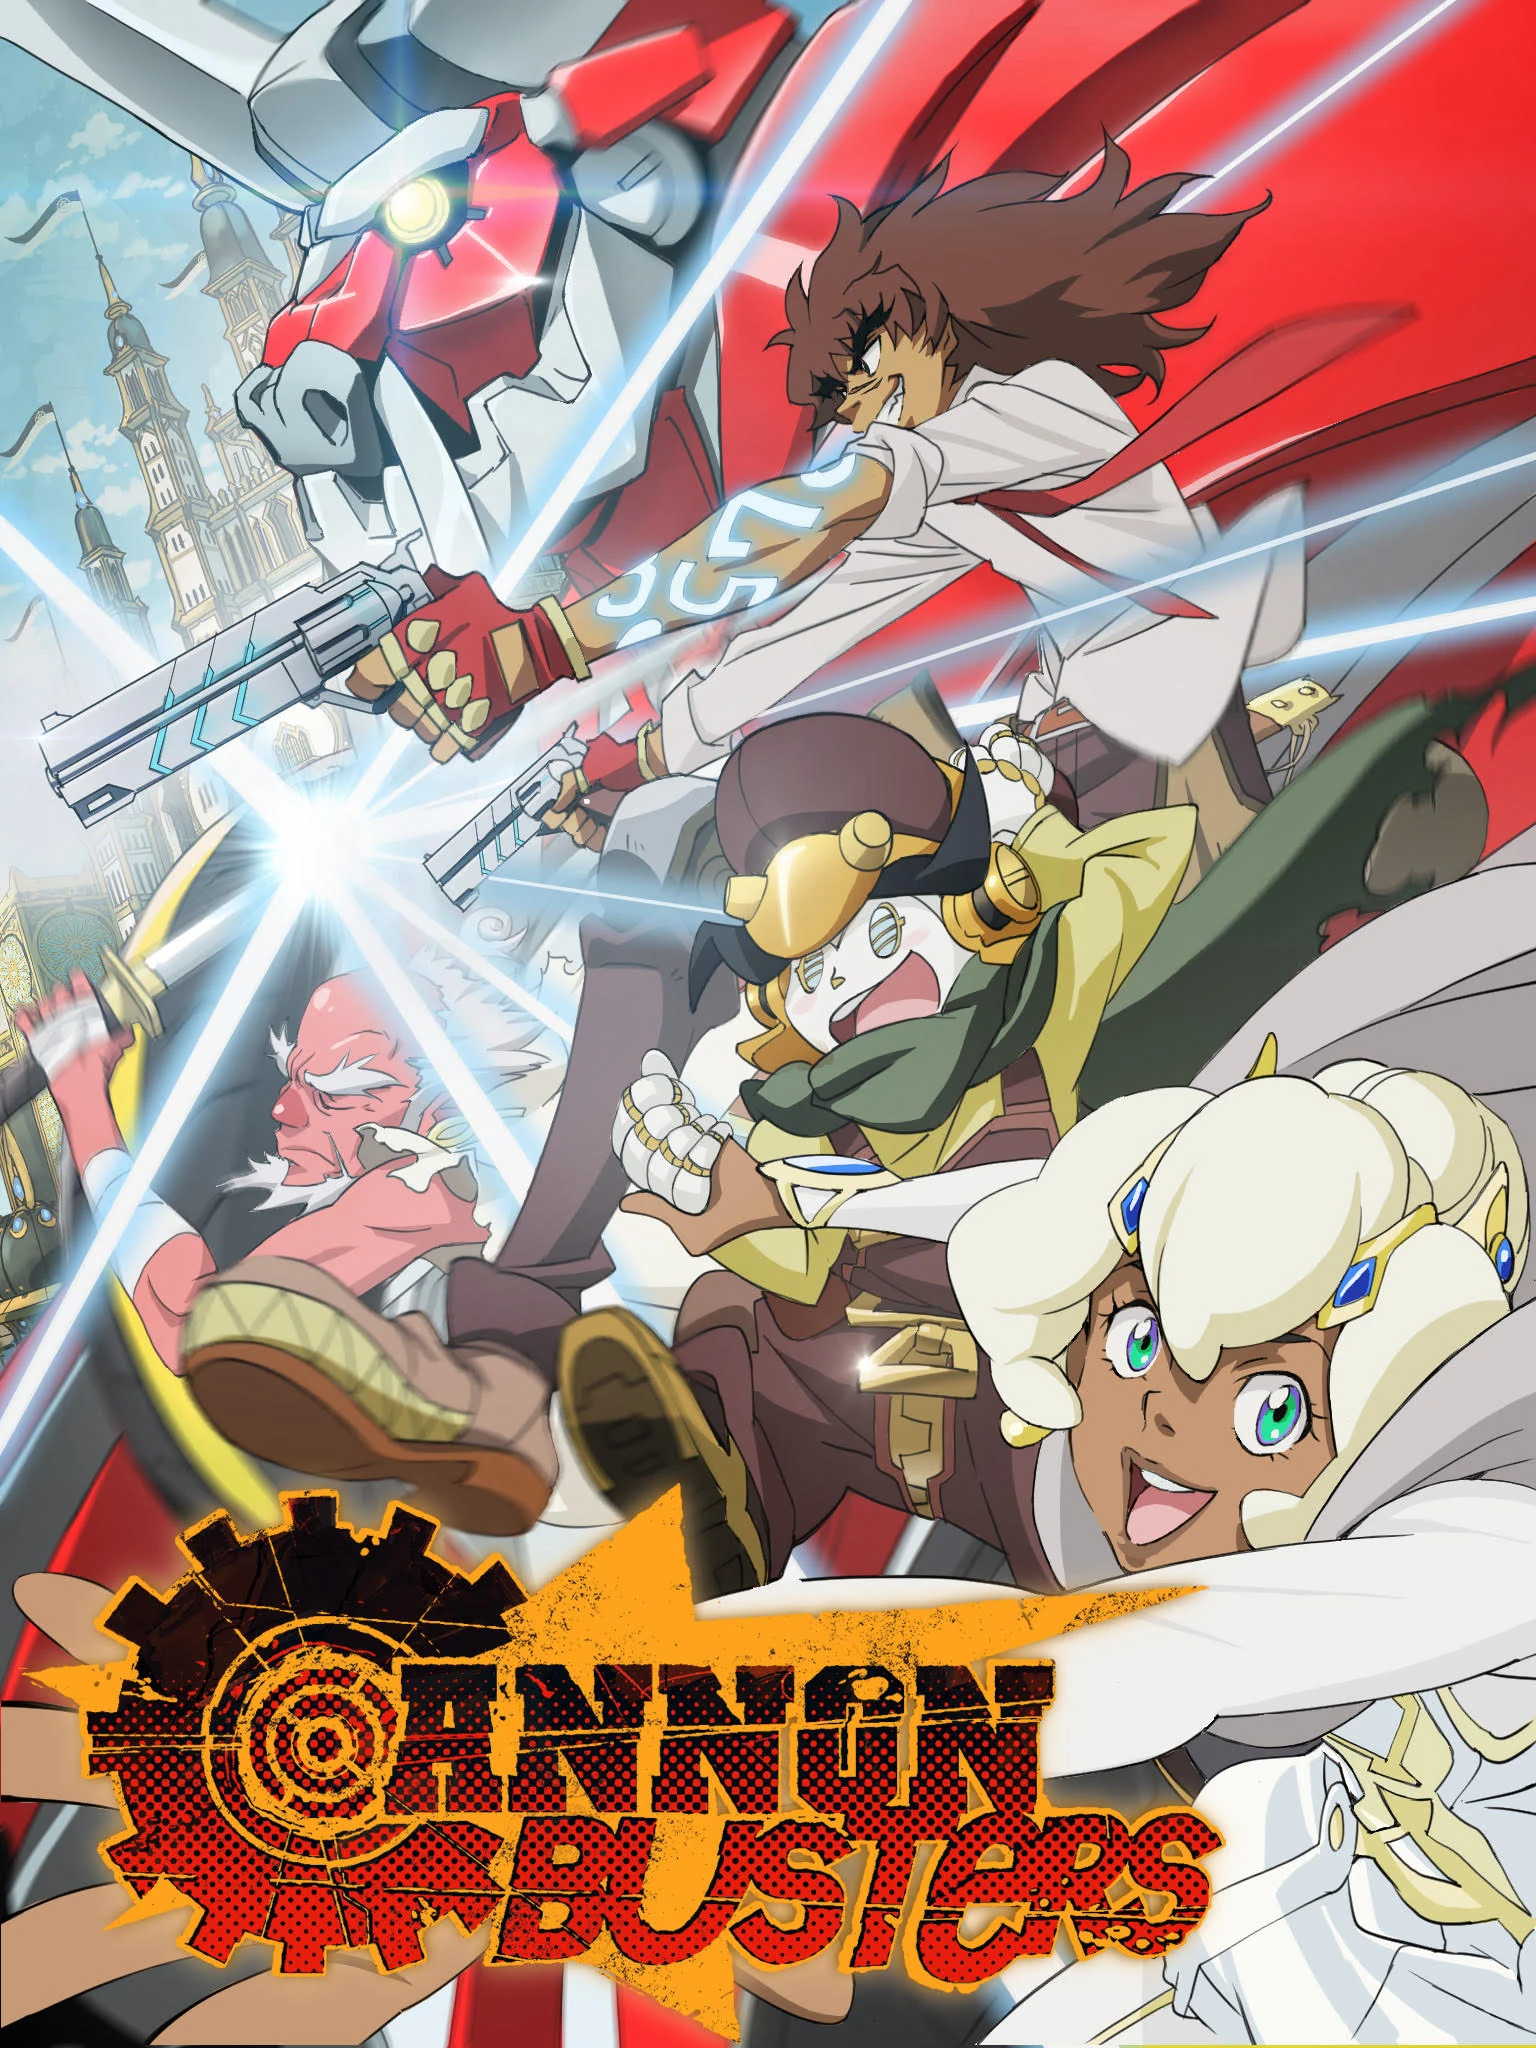 Cannon Busters: Khắc tinh đại pháo | Cannon Busters (2019)